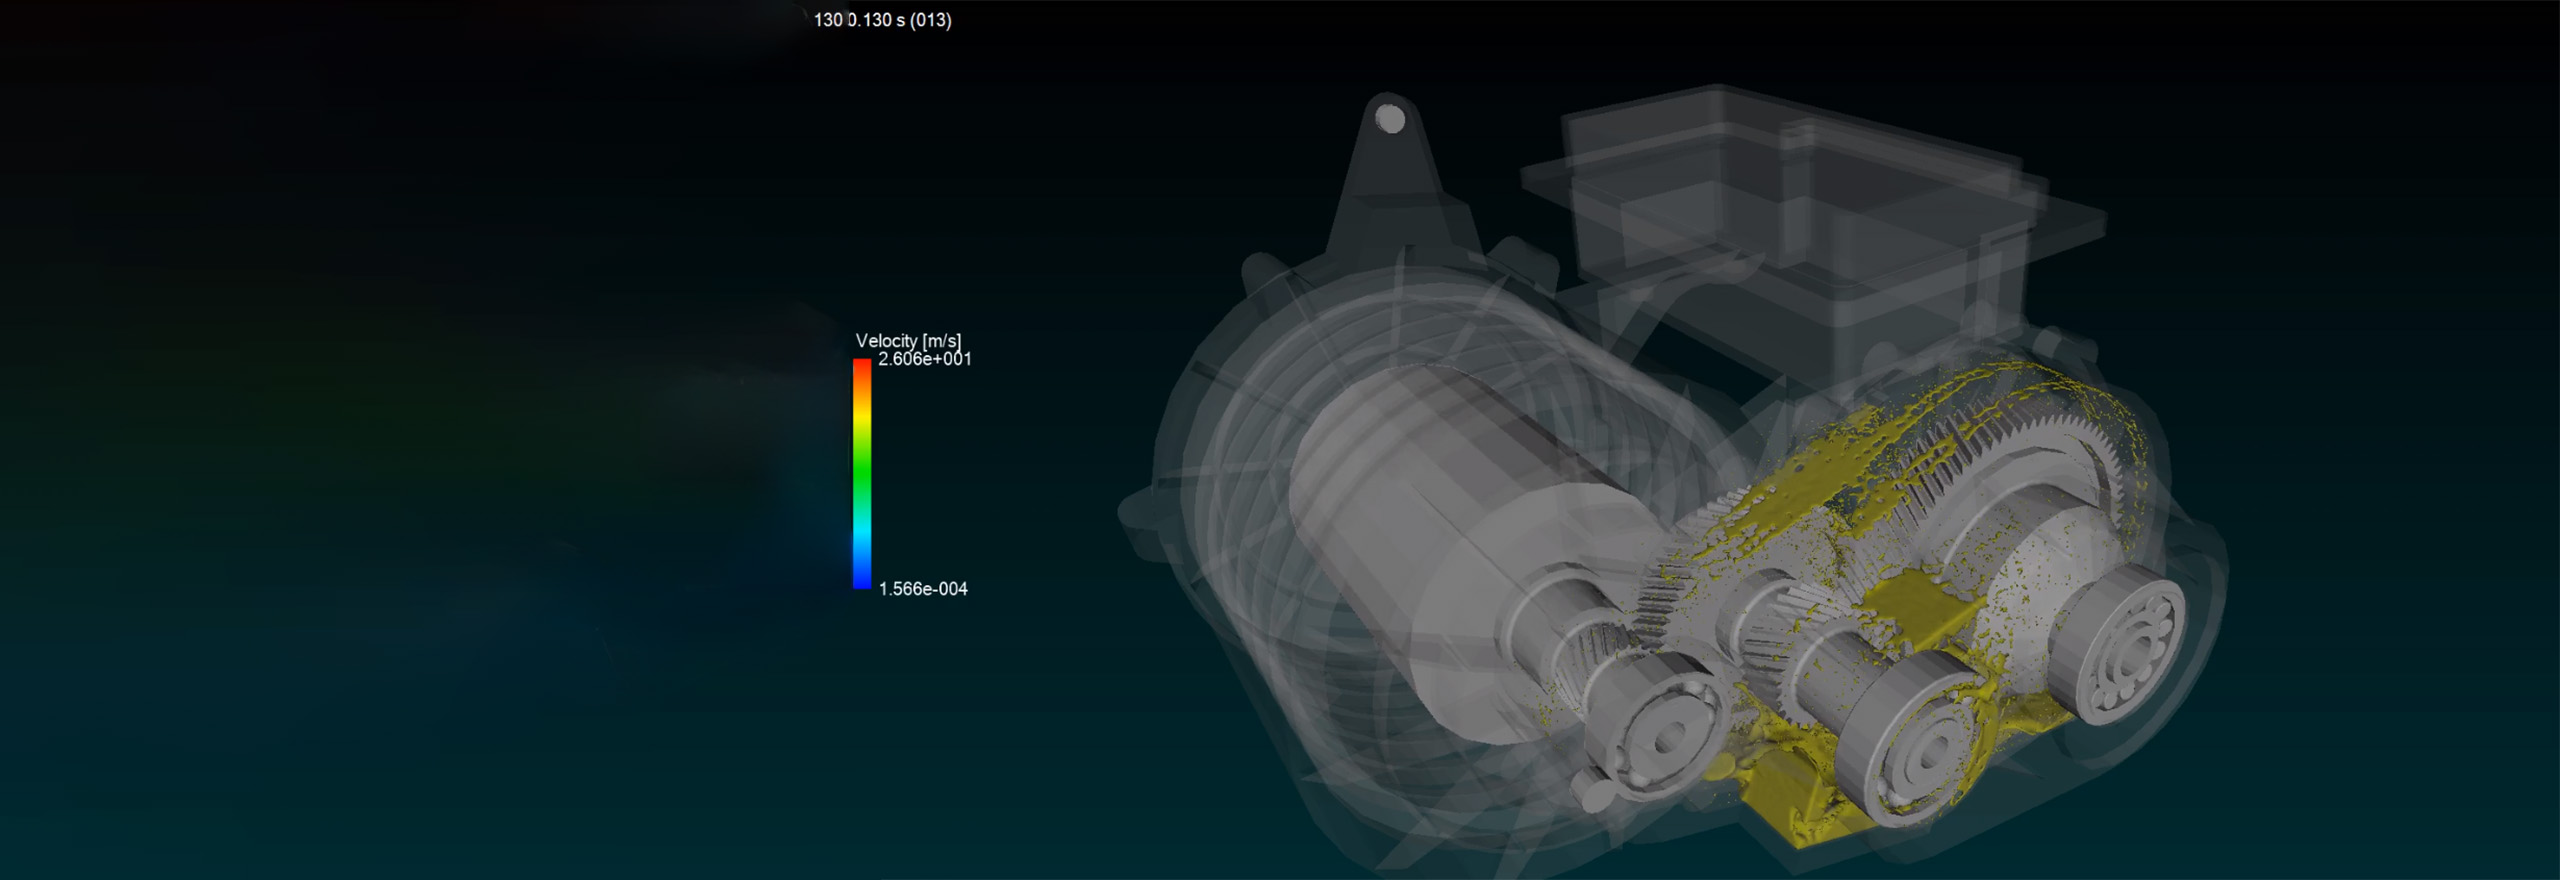 Gearbox simulation model from Romax being used in Particleworks CFD simulation